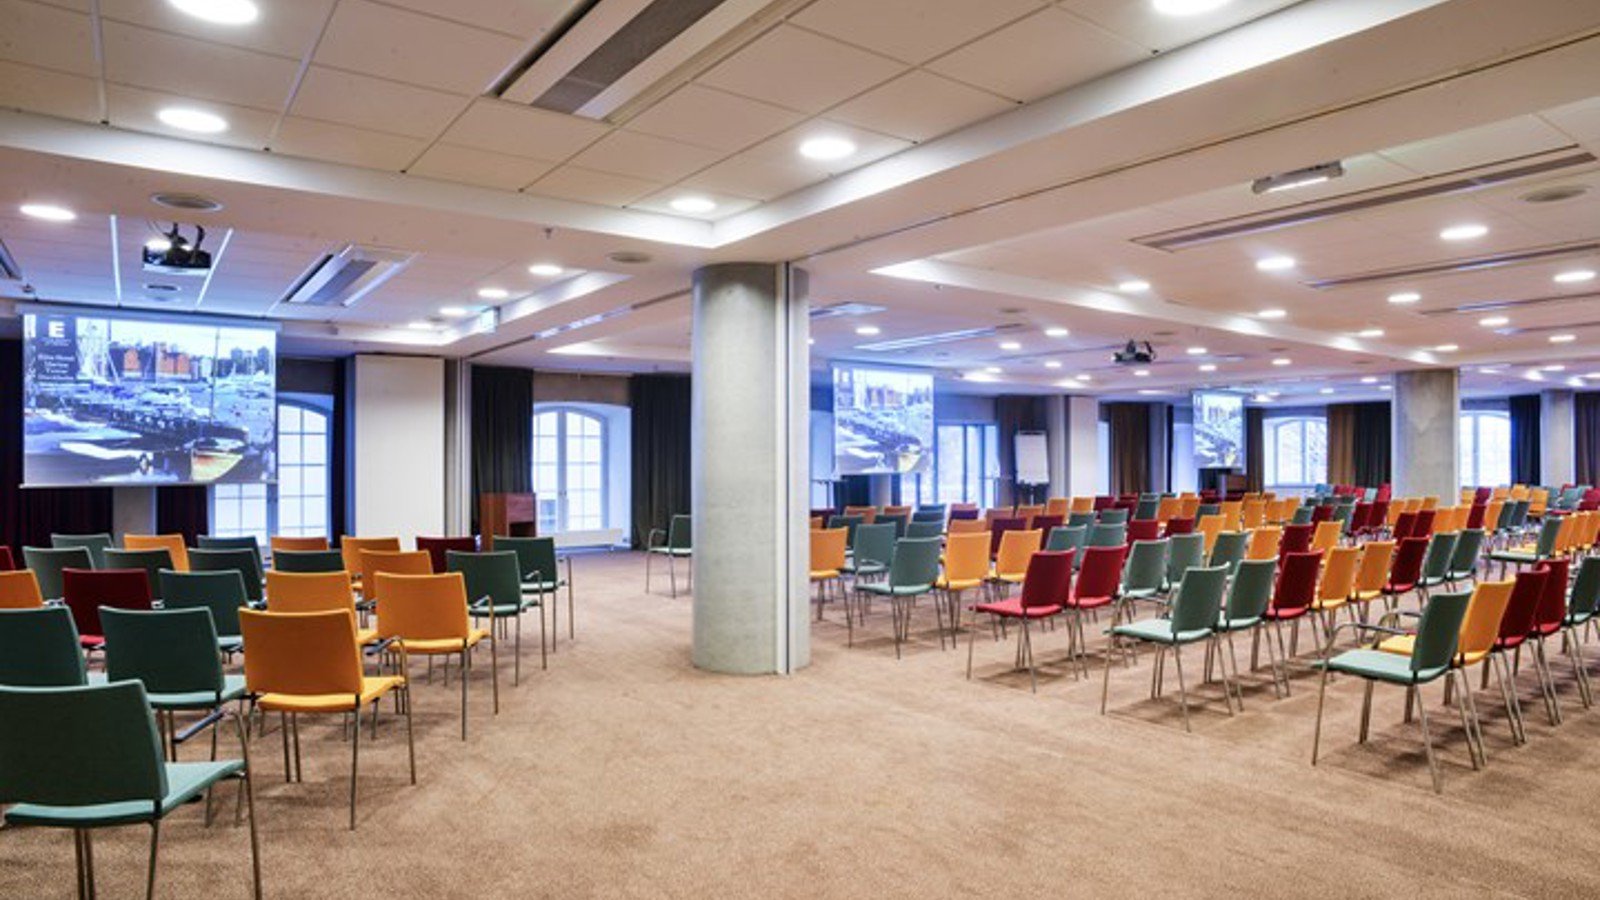 Conference room with cinema seating, colorful chairs and many windows